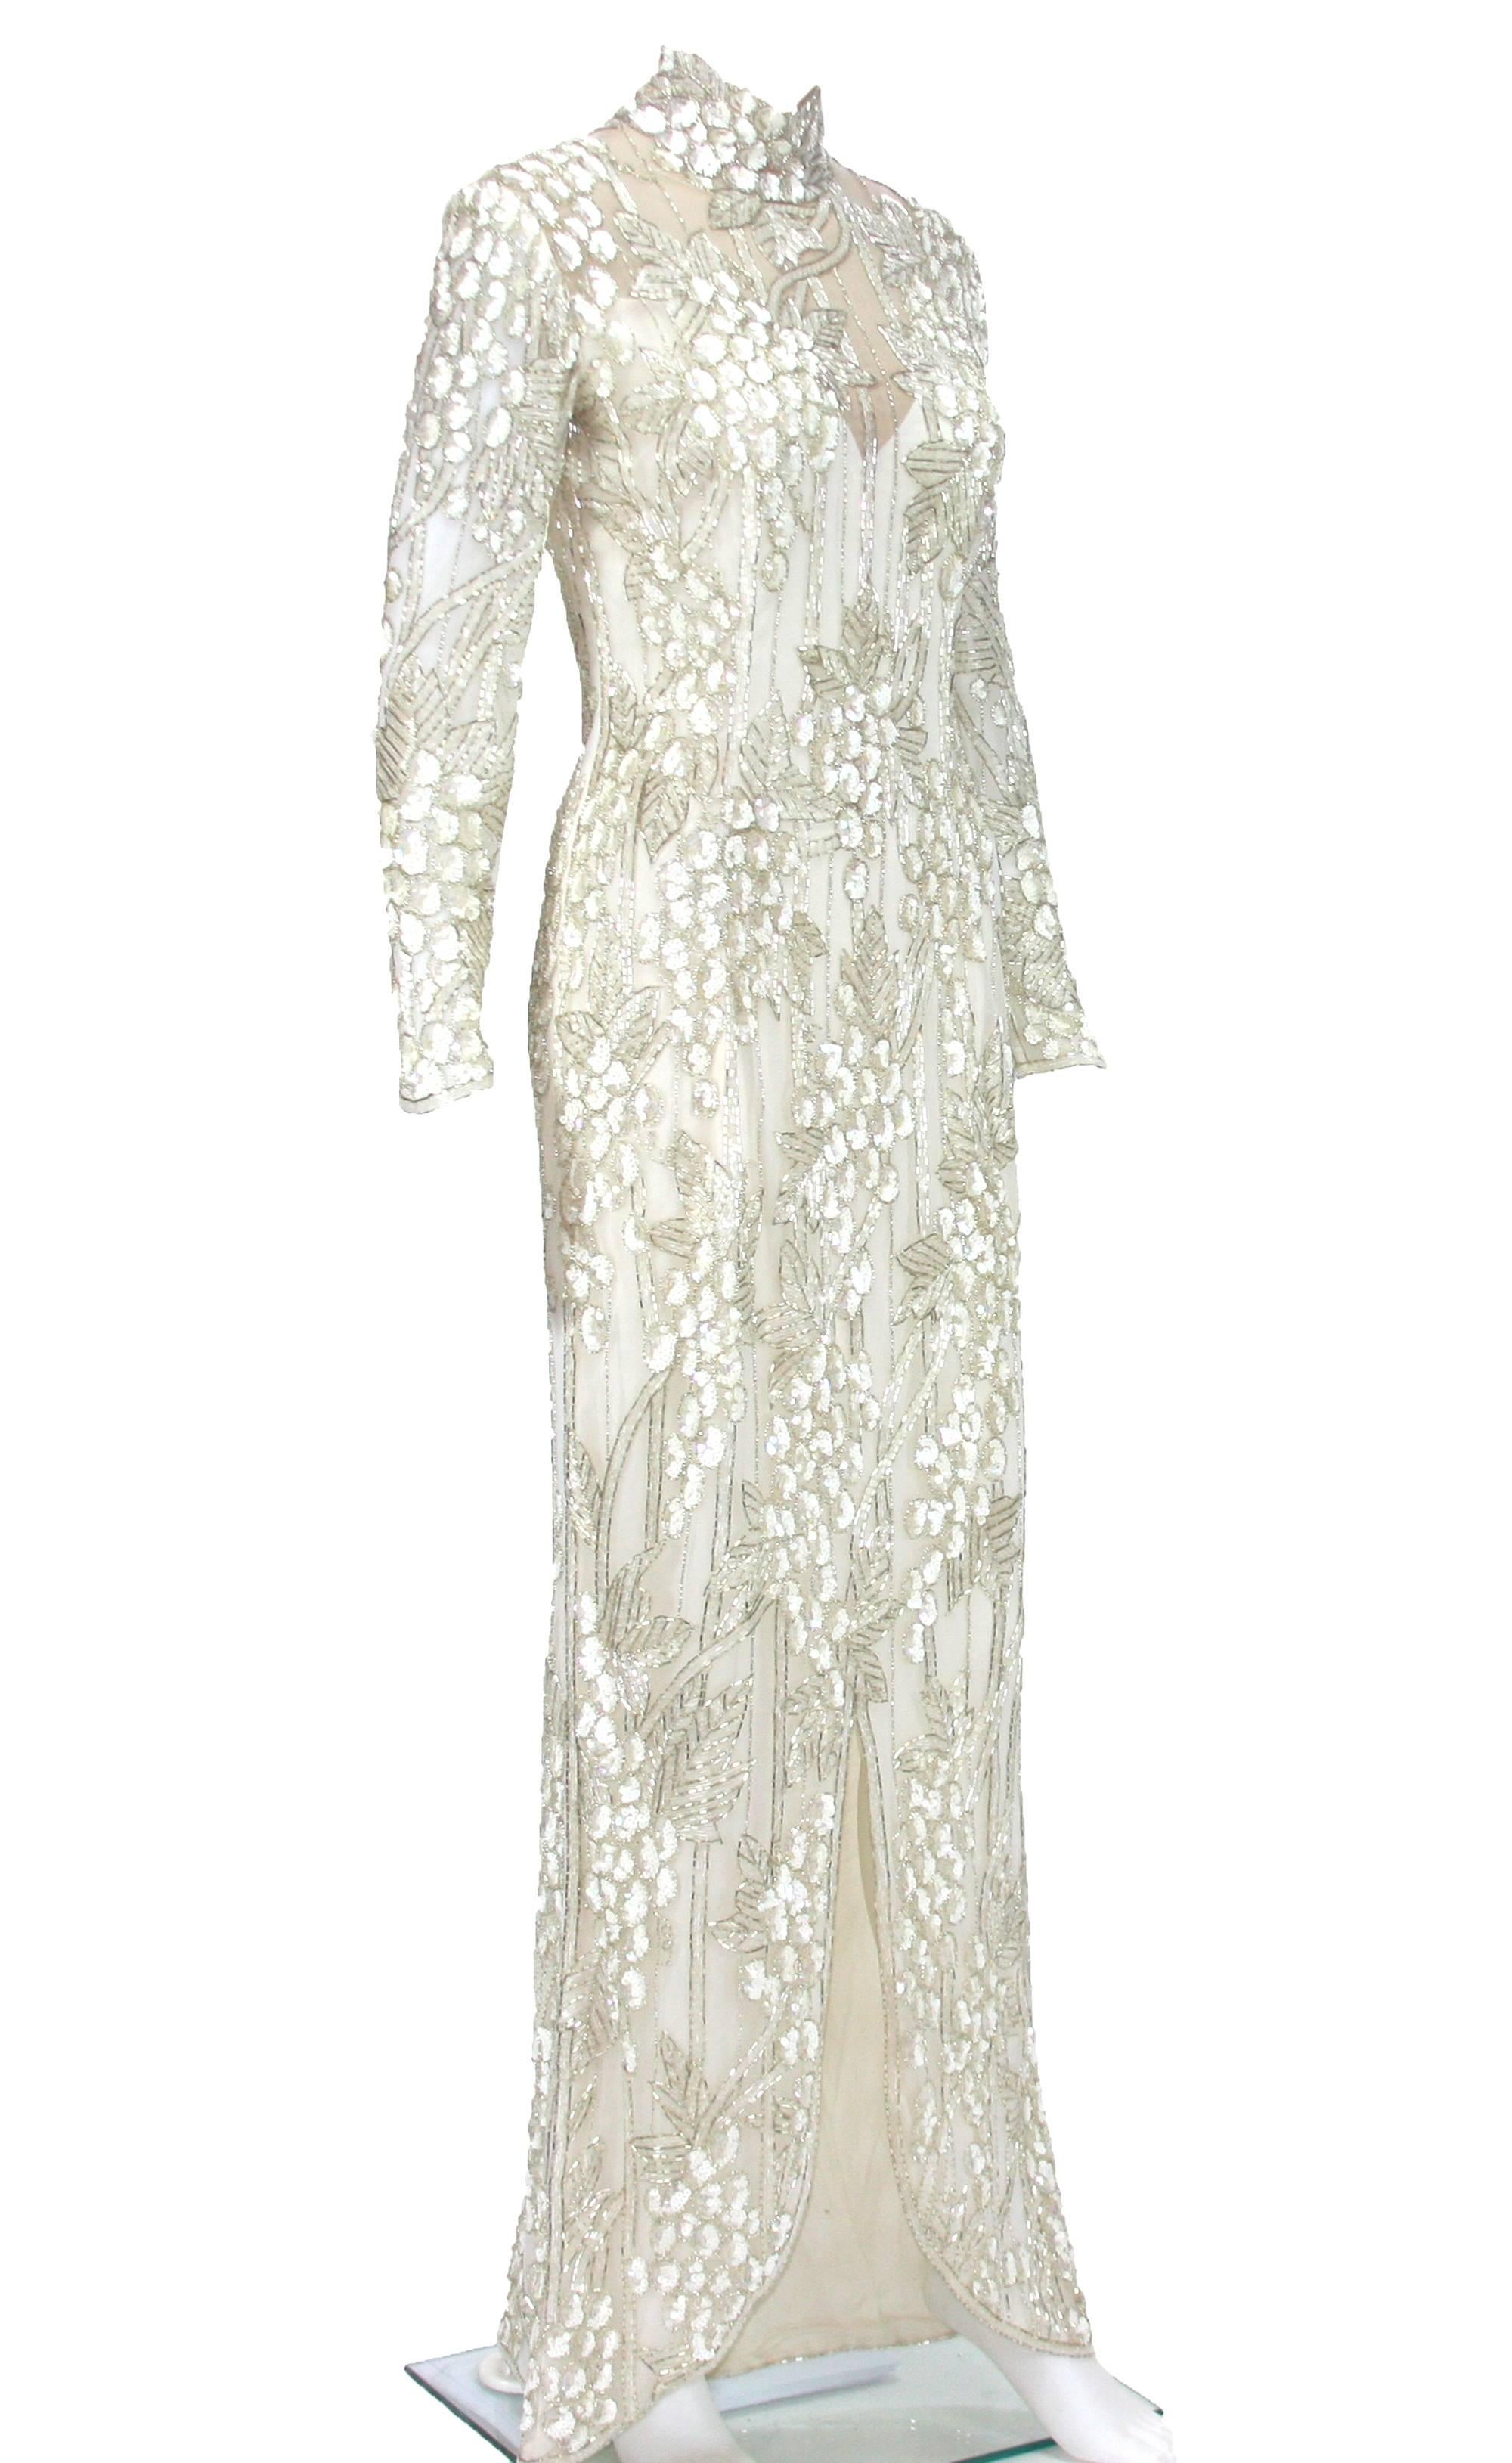 The same dress in gold color was worn by Sharon Stone in the 1995 film  Casino.
A white embroidered net gown with a beaded grapevine design, from the California Collection - a salute to the Napa Valley.
Sold at Christie's for $13,200.
Fully lined.